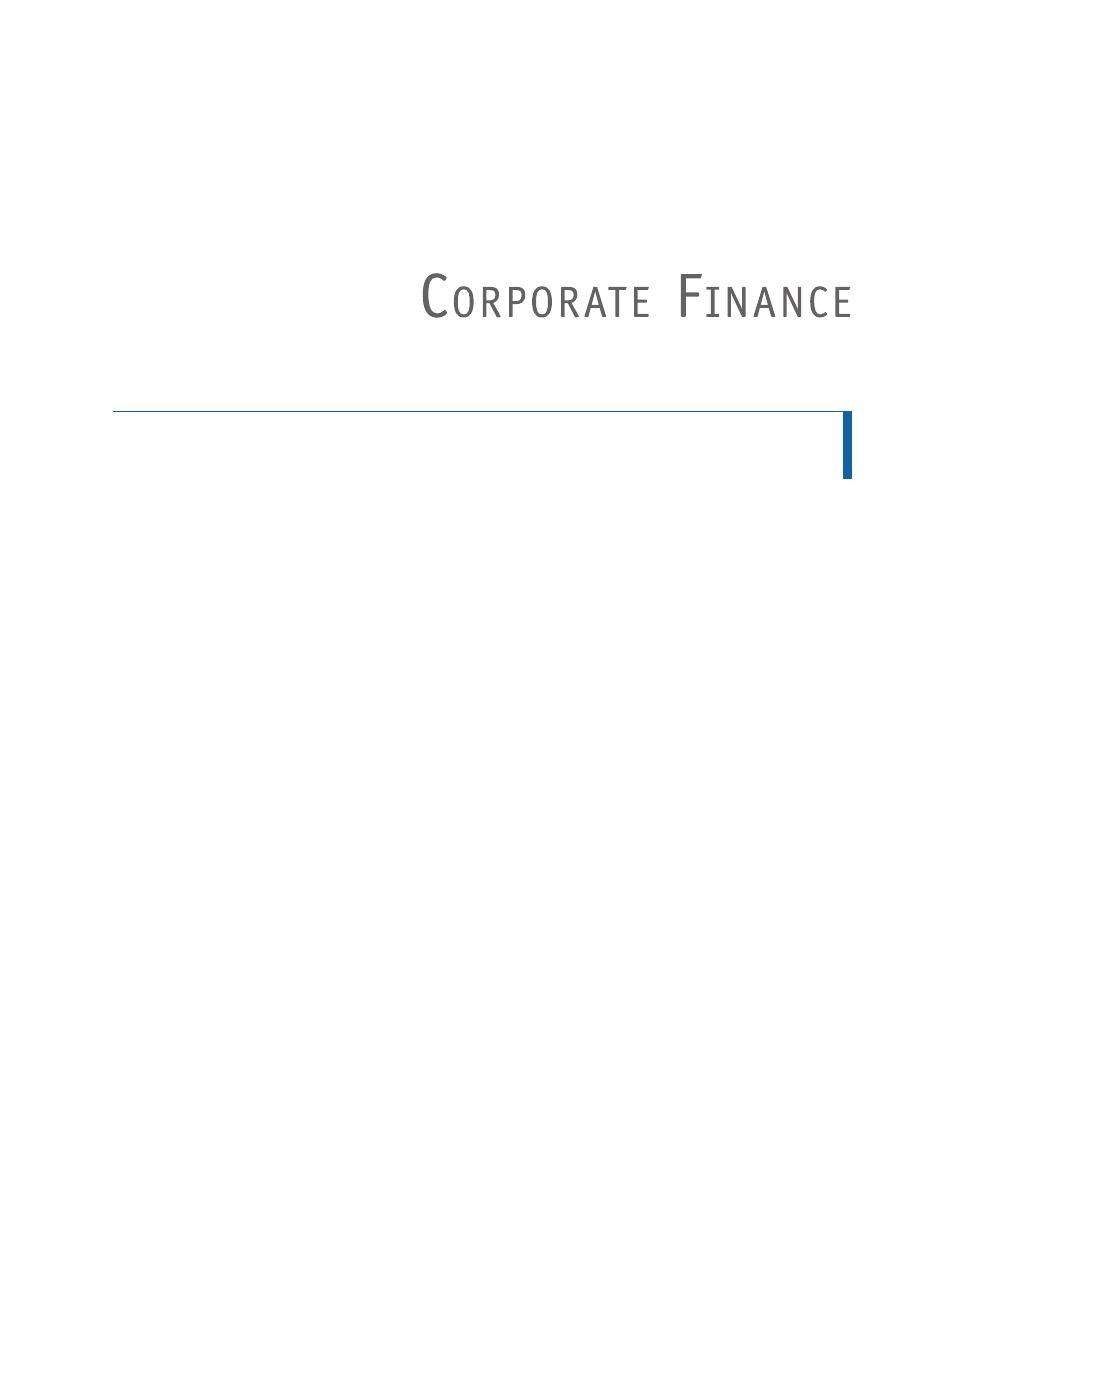 Corporate finance   theory and practice ( PDFDrive ) 2018